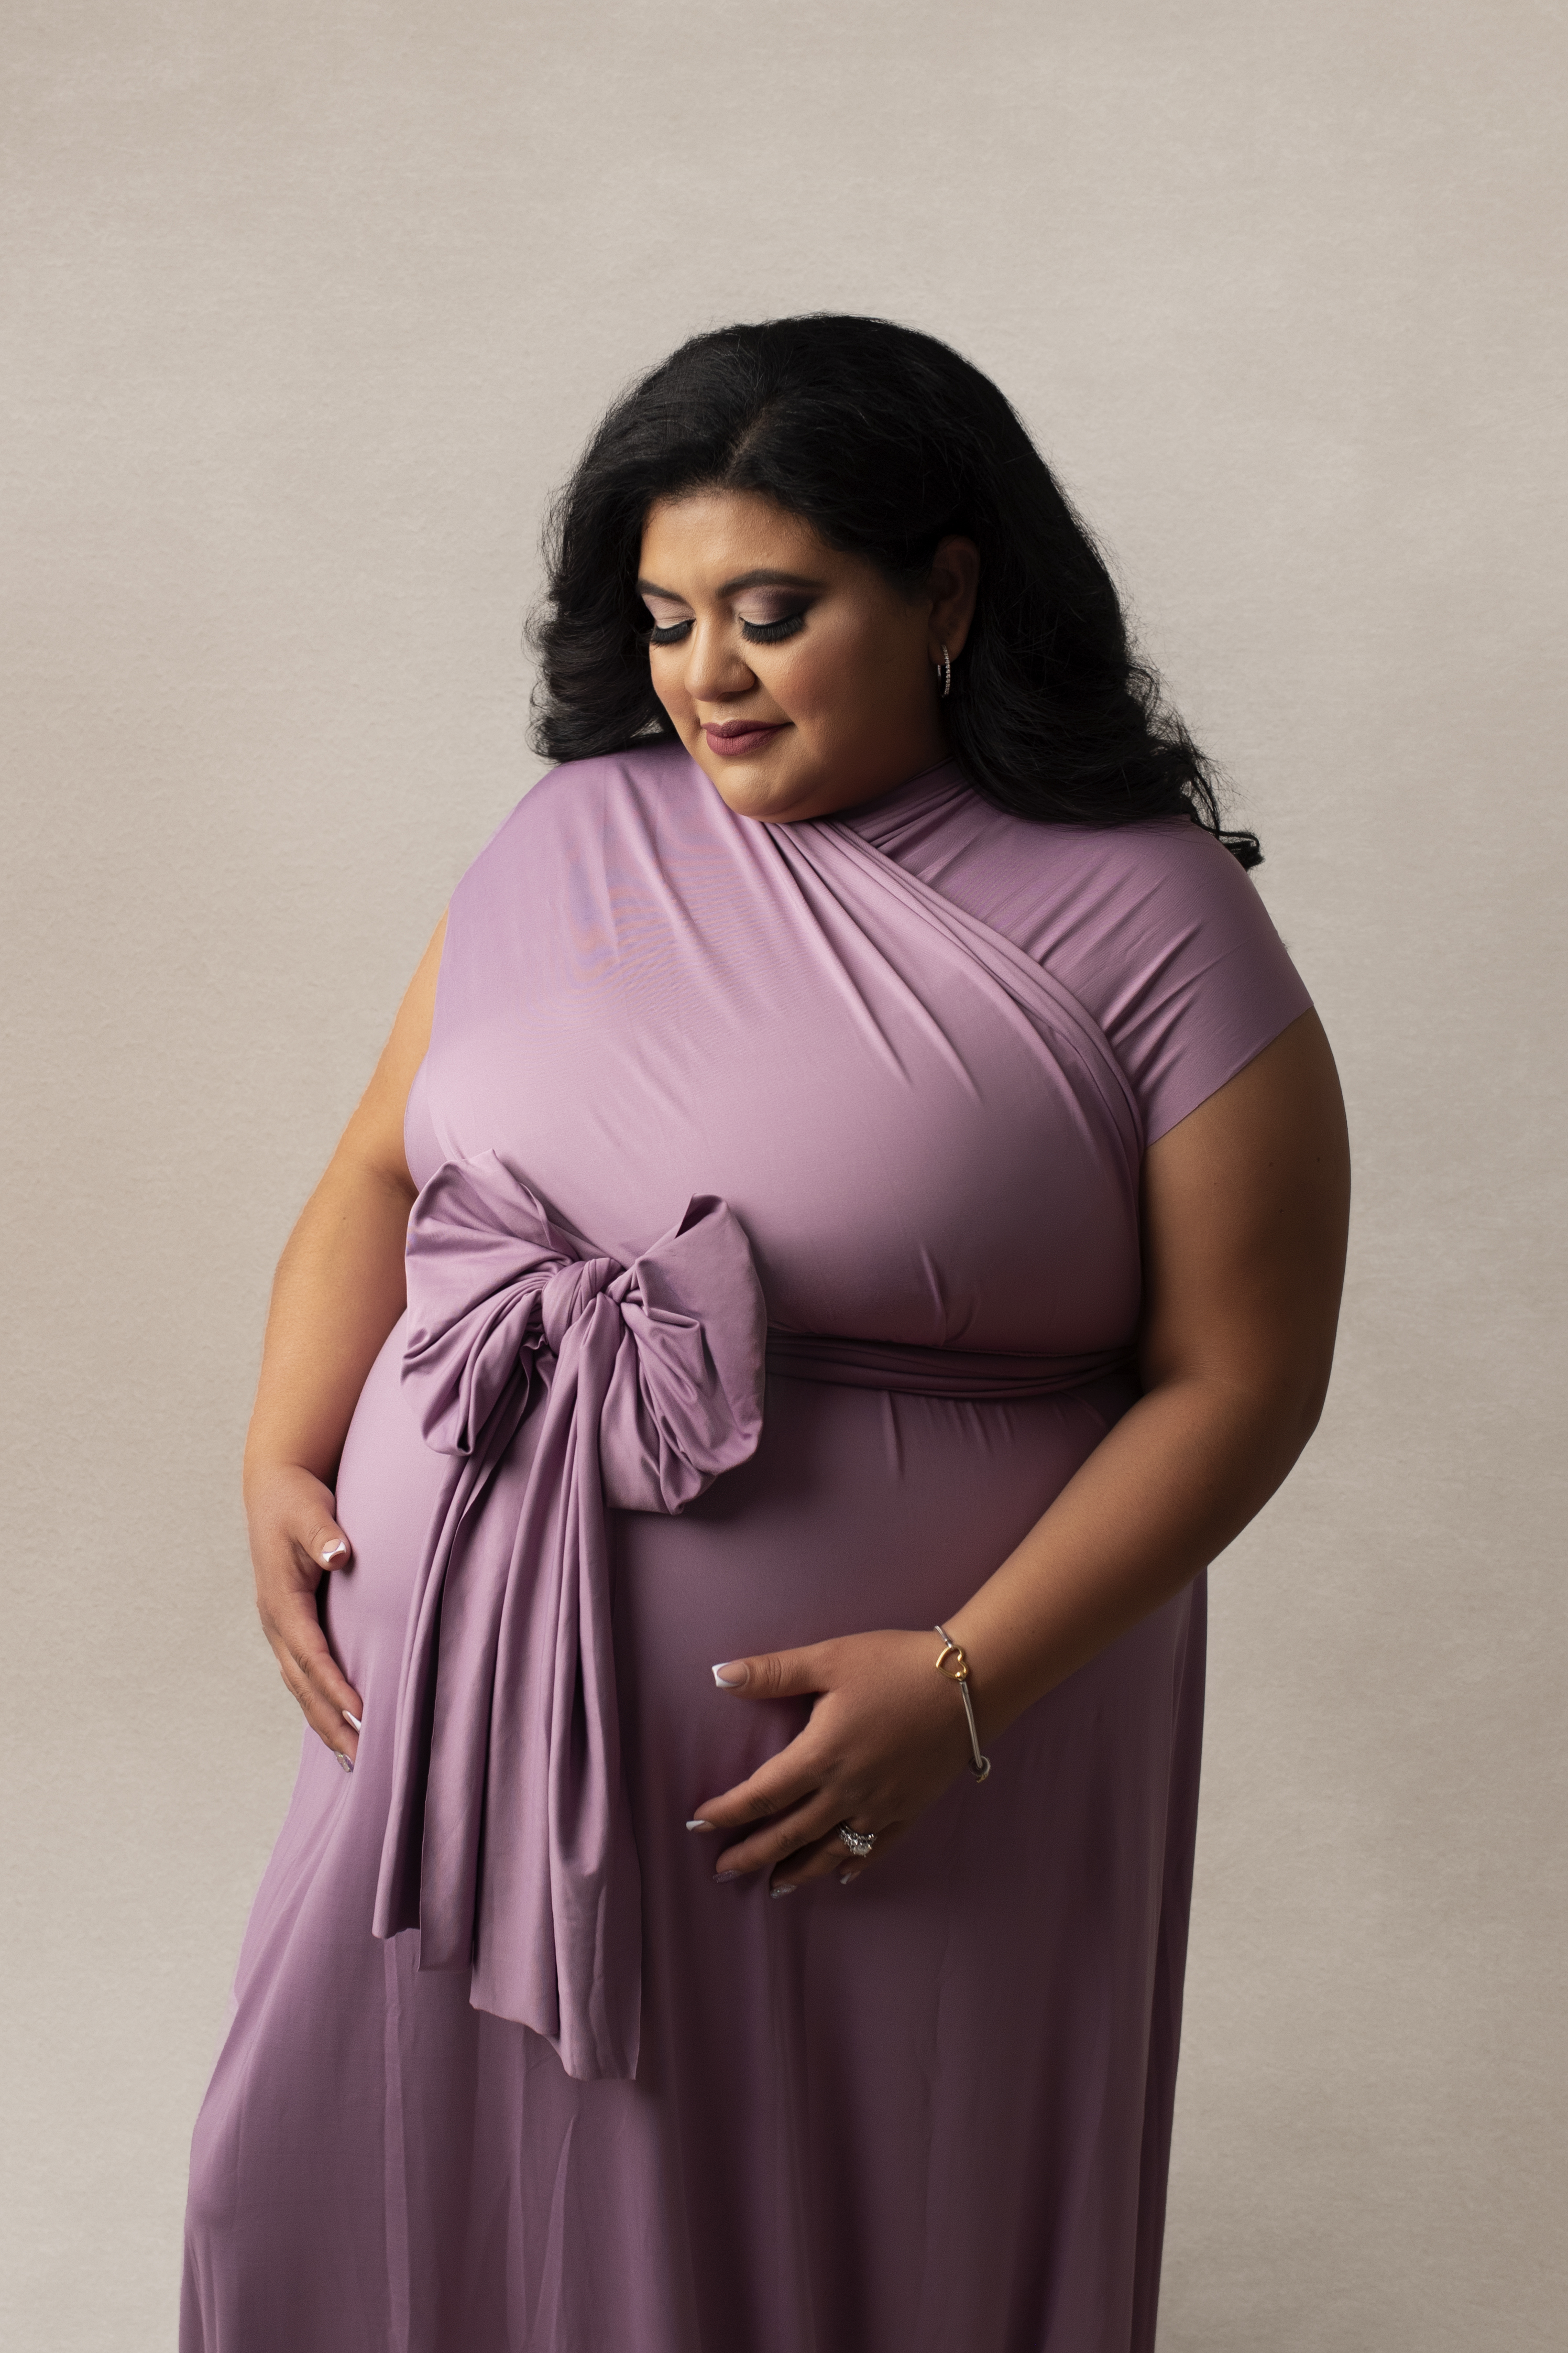 Grand rapids maternity photo session mother in purple gown looking at baby bump